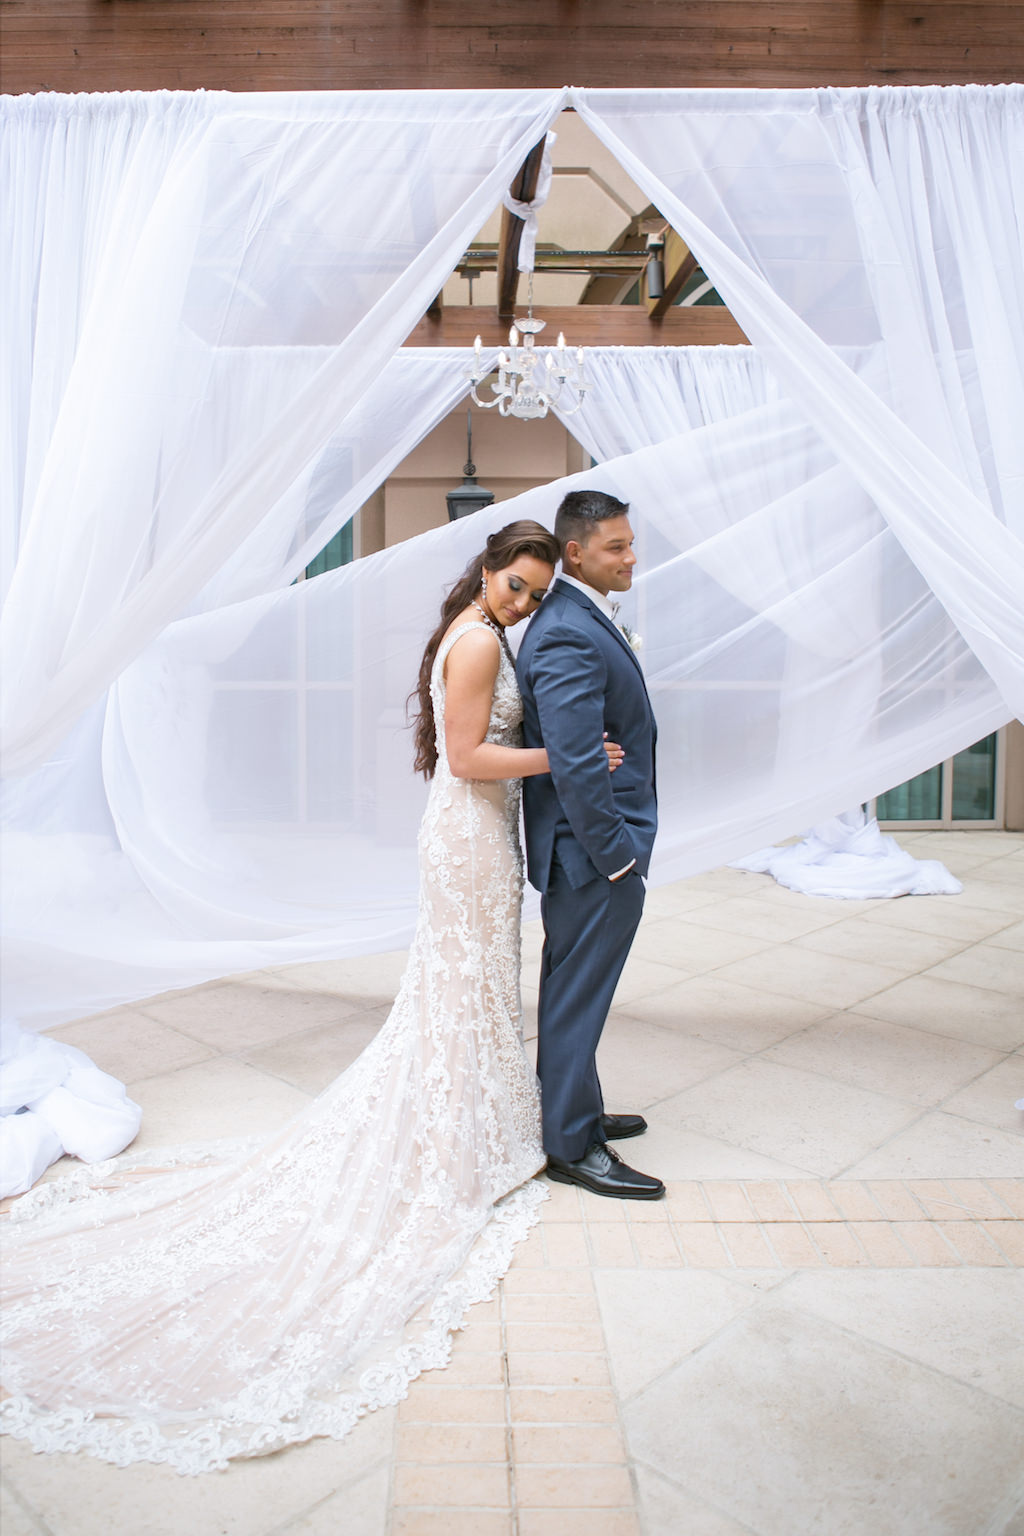 Florida Bride and Groom Wedding Portrait in Hotel Courtyard with White Linen Draping | Tampa Bay Wedding Photographer Carrie Wildes Photography | Wedding Planner Coastal Coordinating | Linens Gabro Event Services | Wedding Venue Renaissance Tampa International Plaza